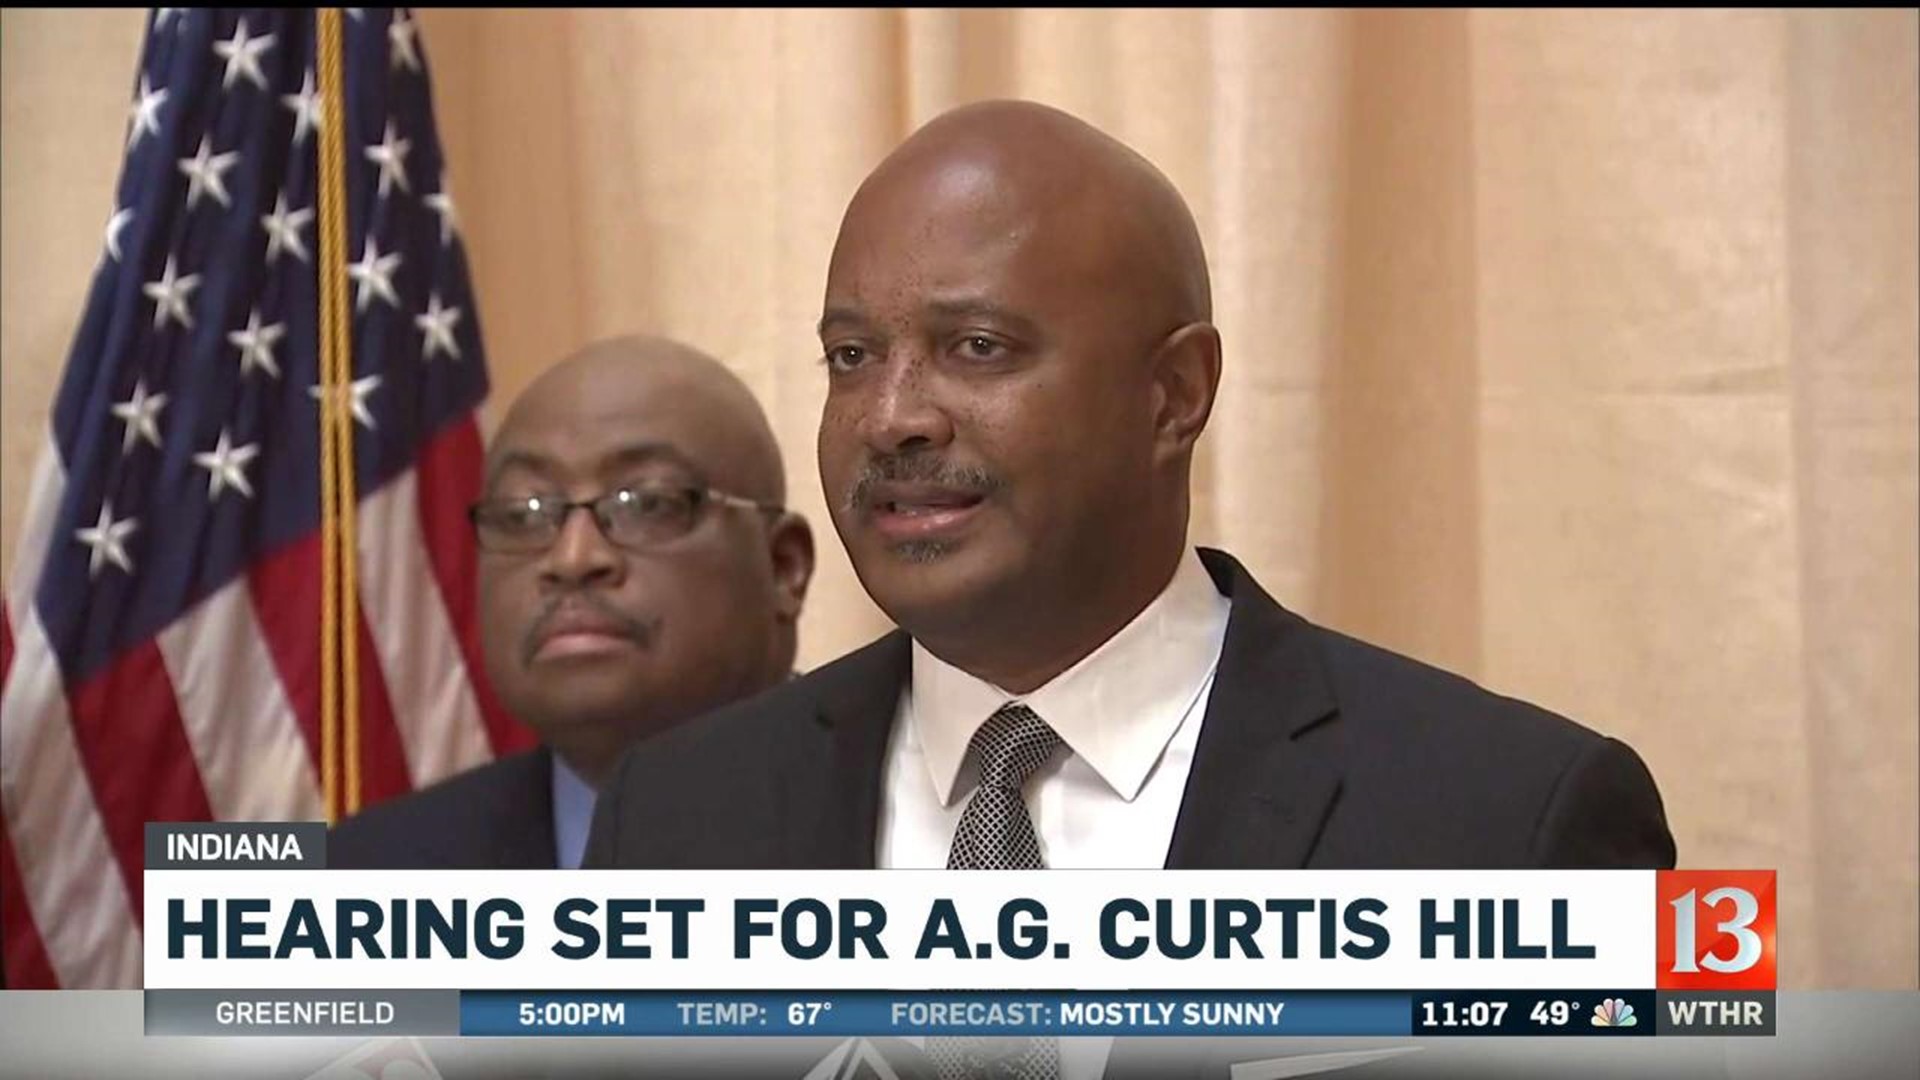 Hearing Set for A.G. Curtis Hill